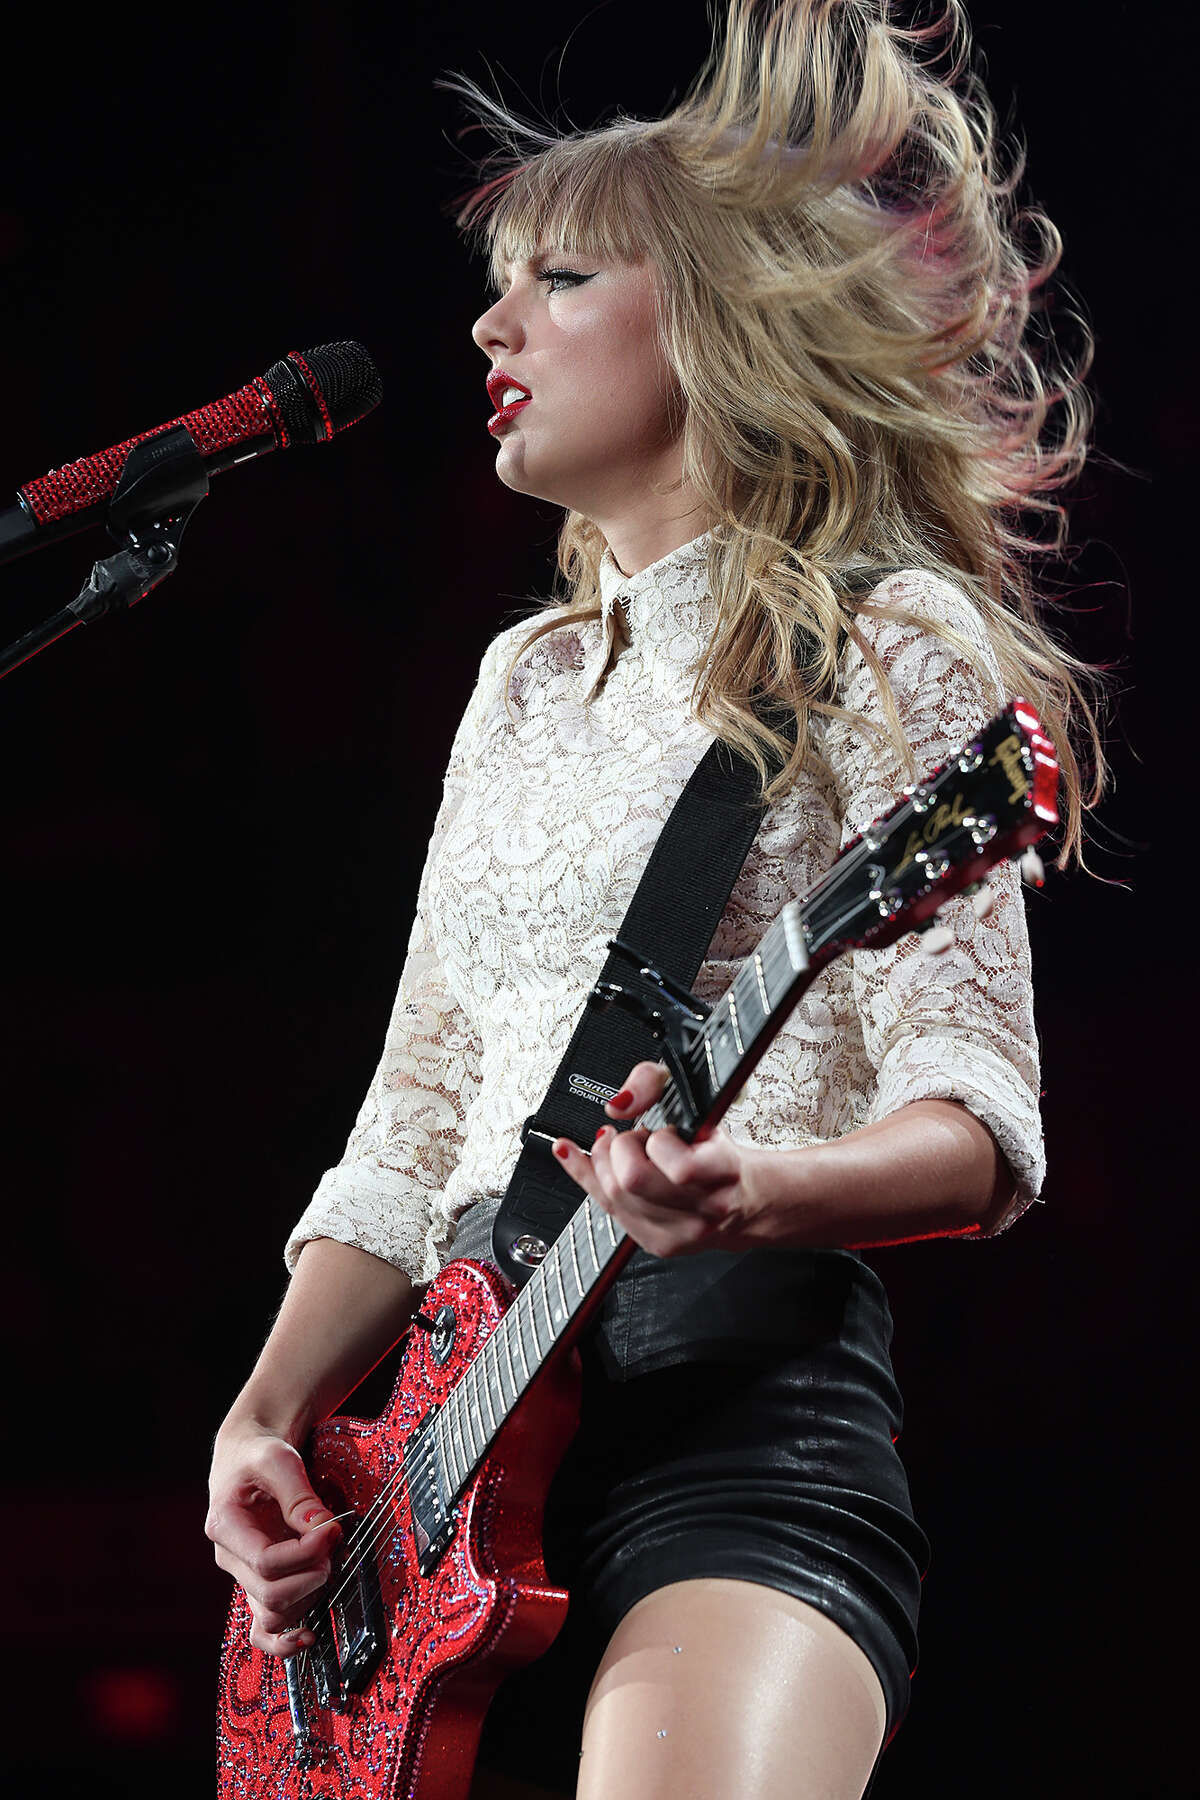 Taylor Swift performs during her "Red" tour at the AT&T Center, Wednesday, May 22, 2013.